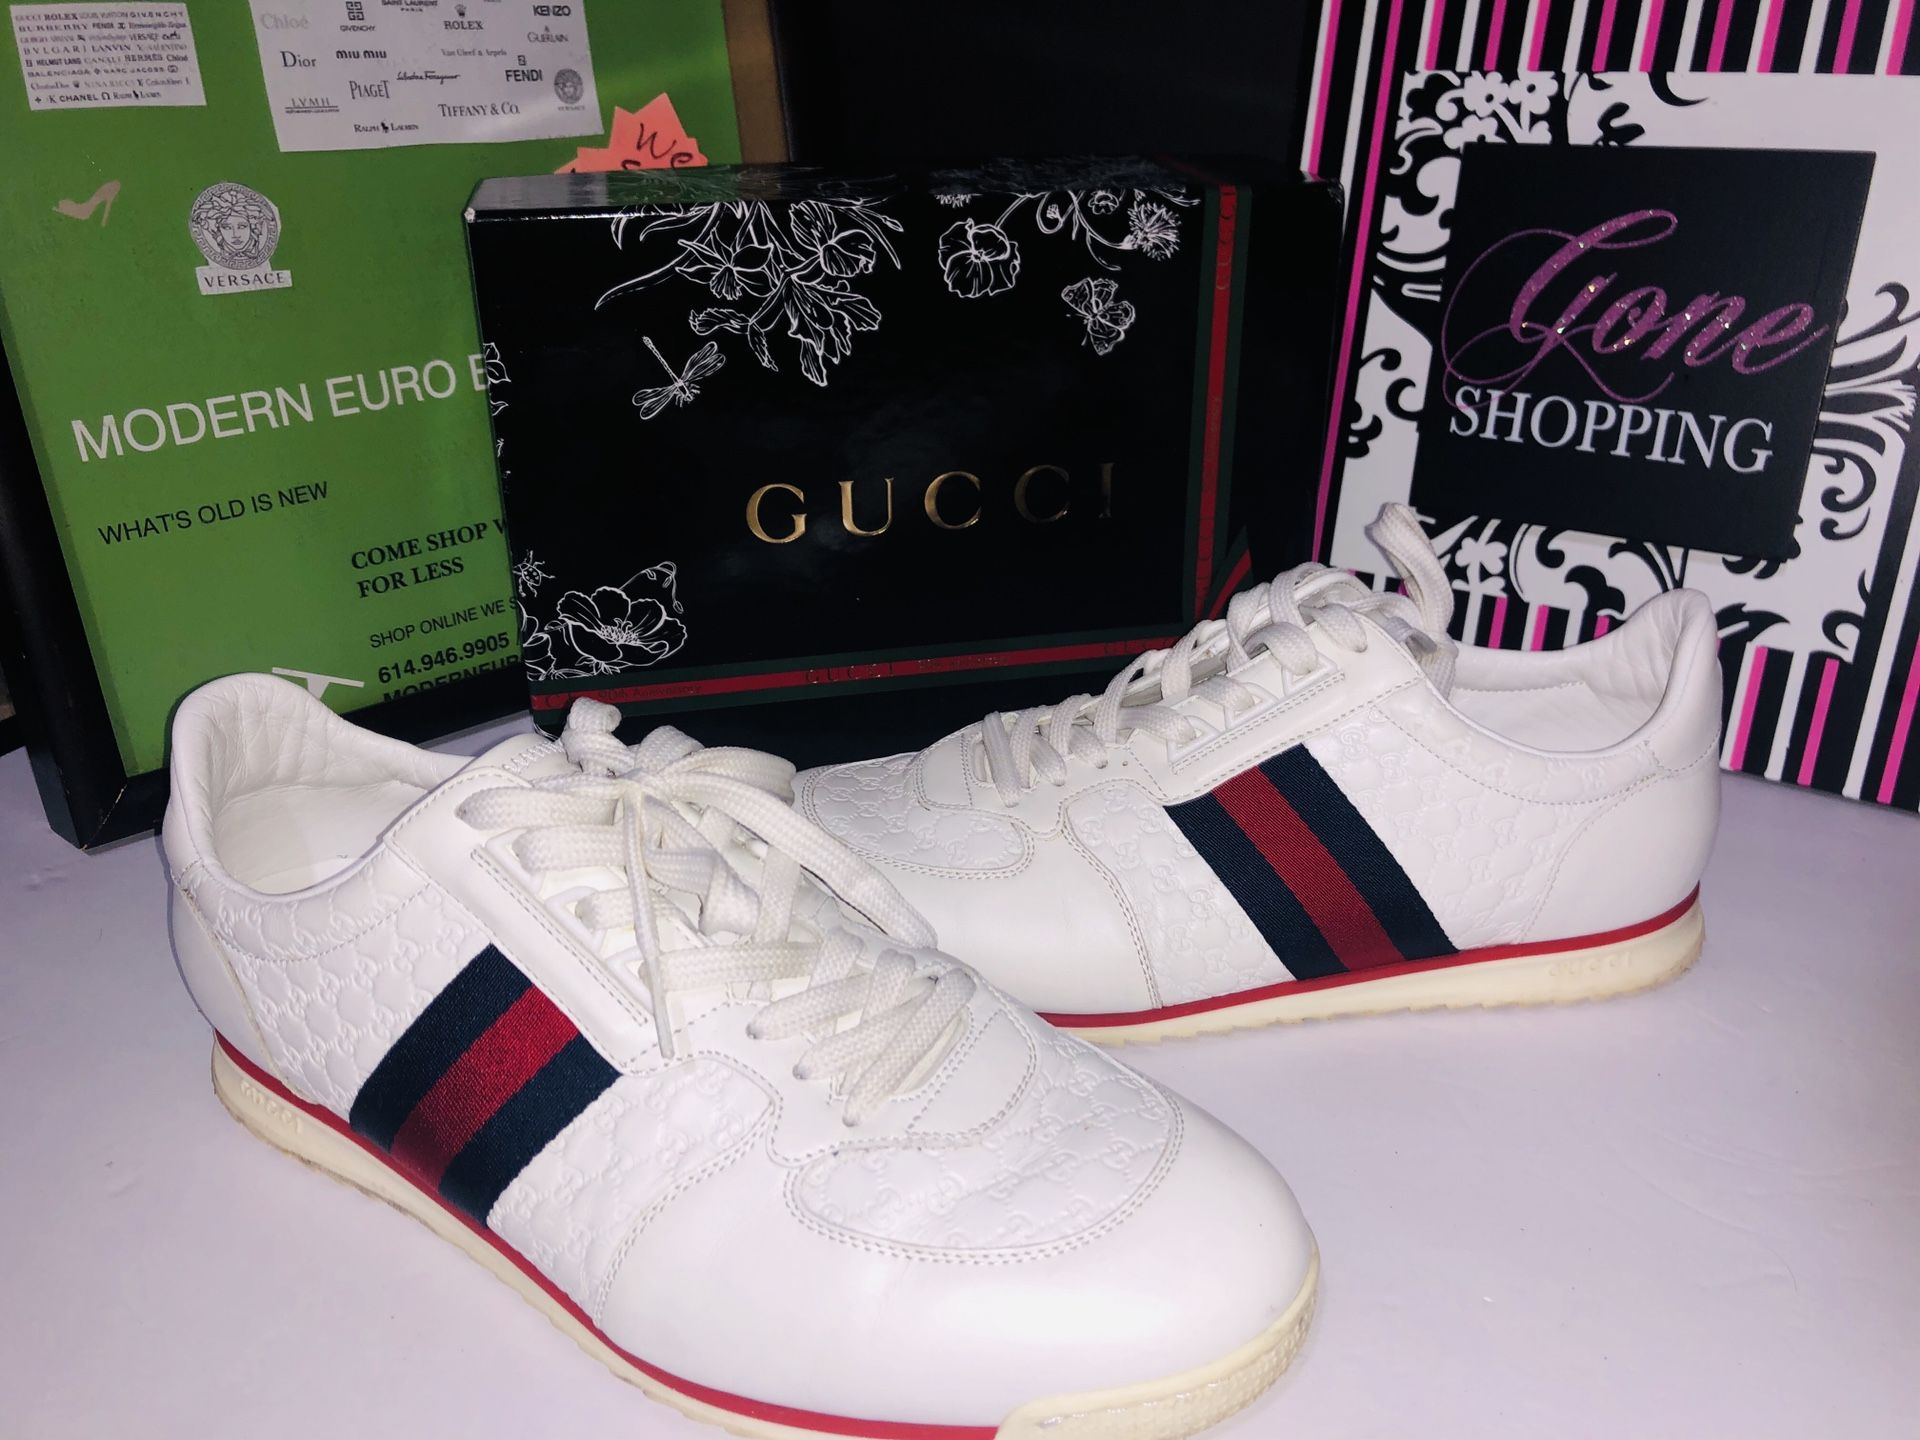 Gucci fashion sneakers 233334 size 9 very nice